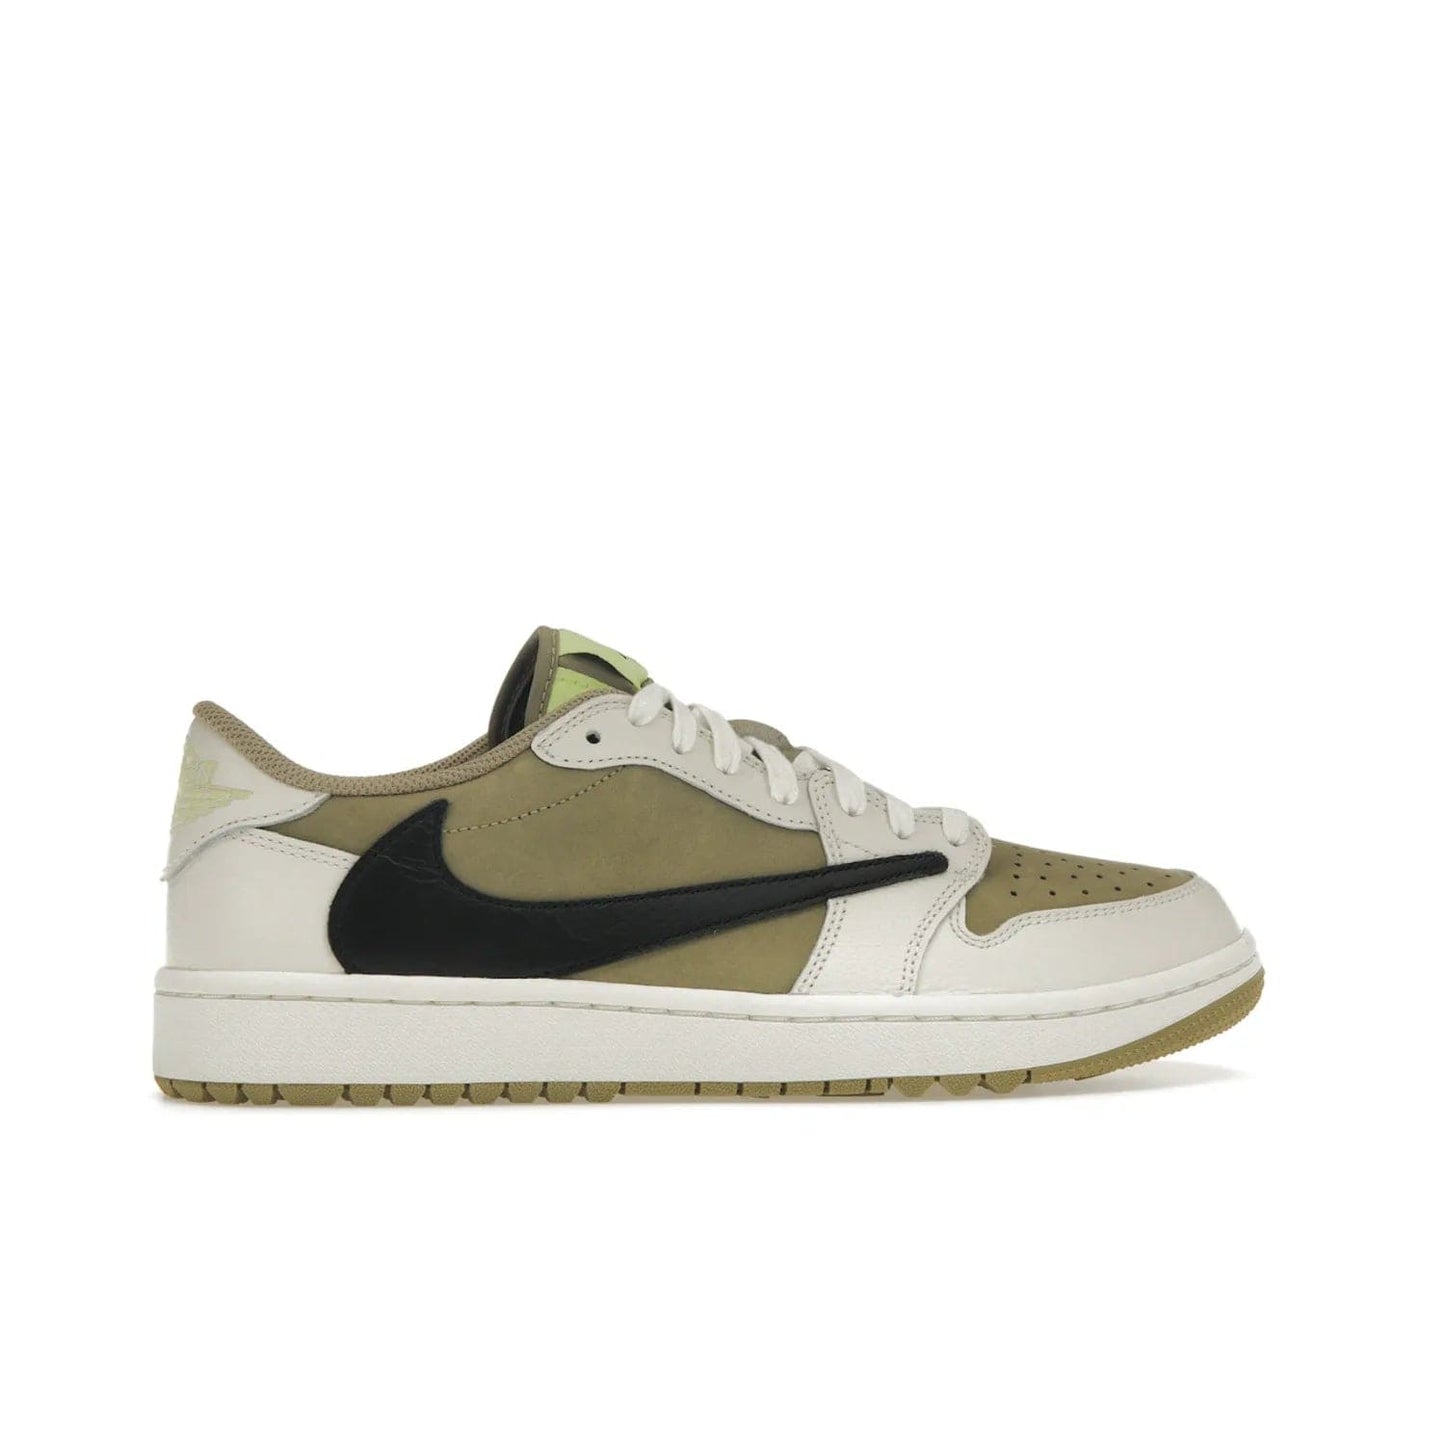 Jordan 1 Retro Low Golf Travis Scott Neutral Olive - Image 36 - Only at www.BallersClubKickz.com - Explore the unique Jordan 1 Retro Low Golf Travis Scott Neutral Olive, an olive-green sneaker collaboration between the iconic Jordan Brand and music royalty, Travis Scott. This special pair is tailored for the golf course with altered traction, hardened rubber, and a sleek style perfect for everyday wear. Get your pair and impress the crowd with its signature earth tones.